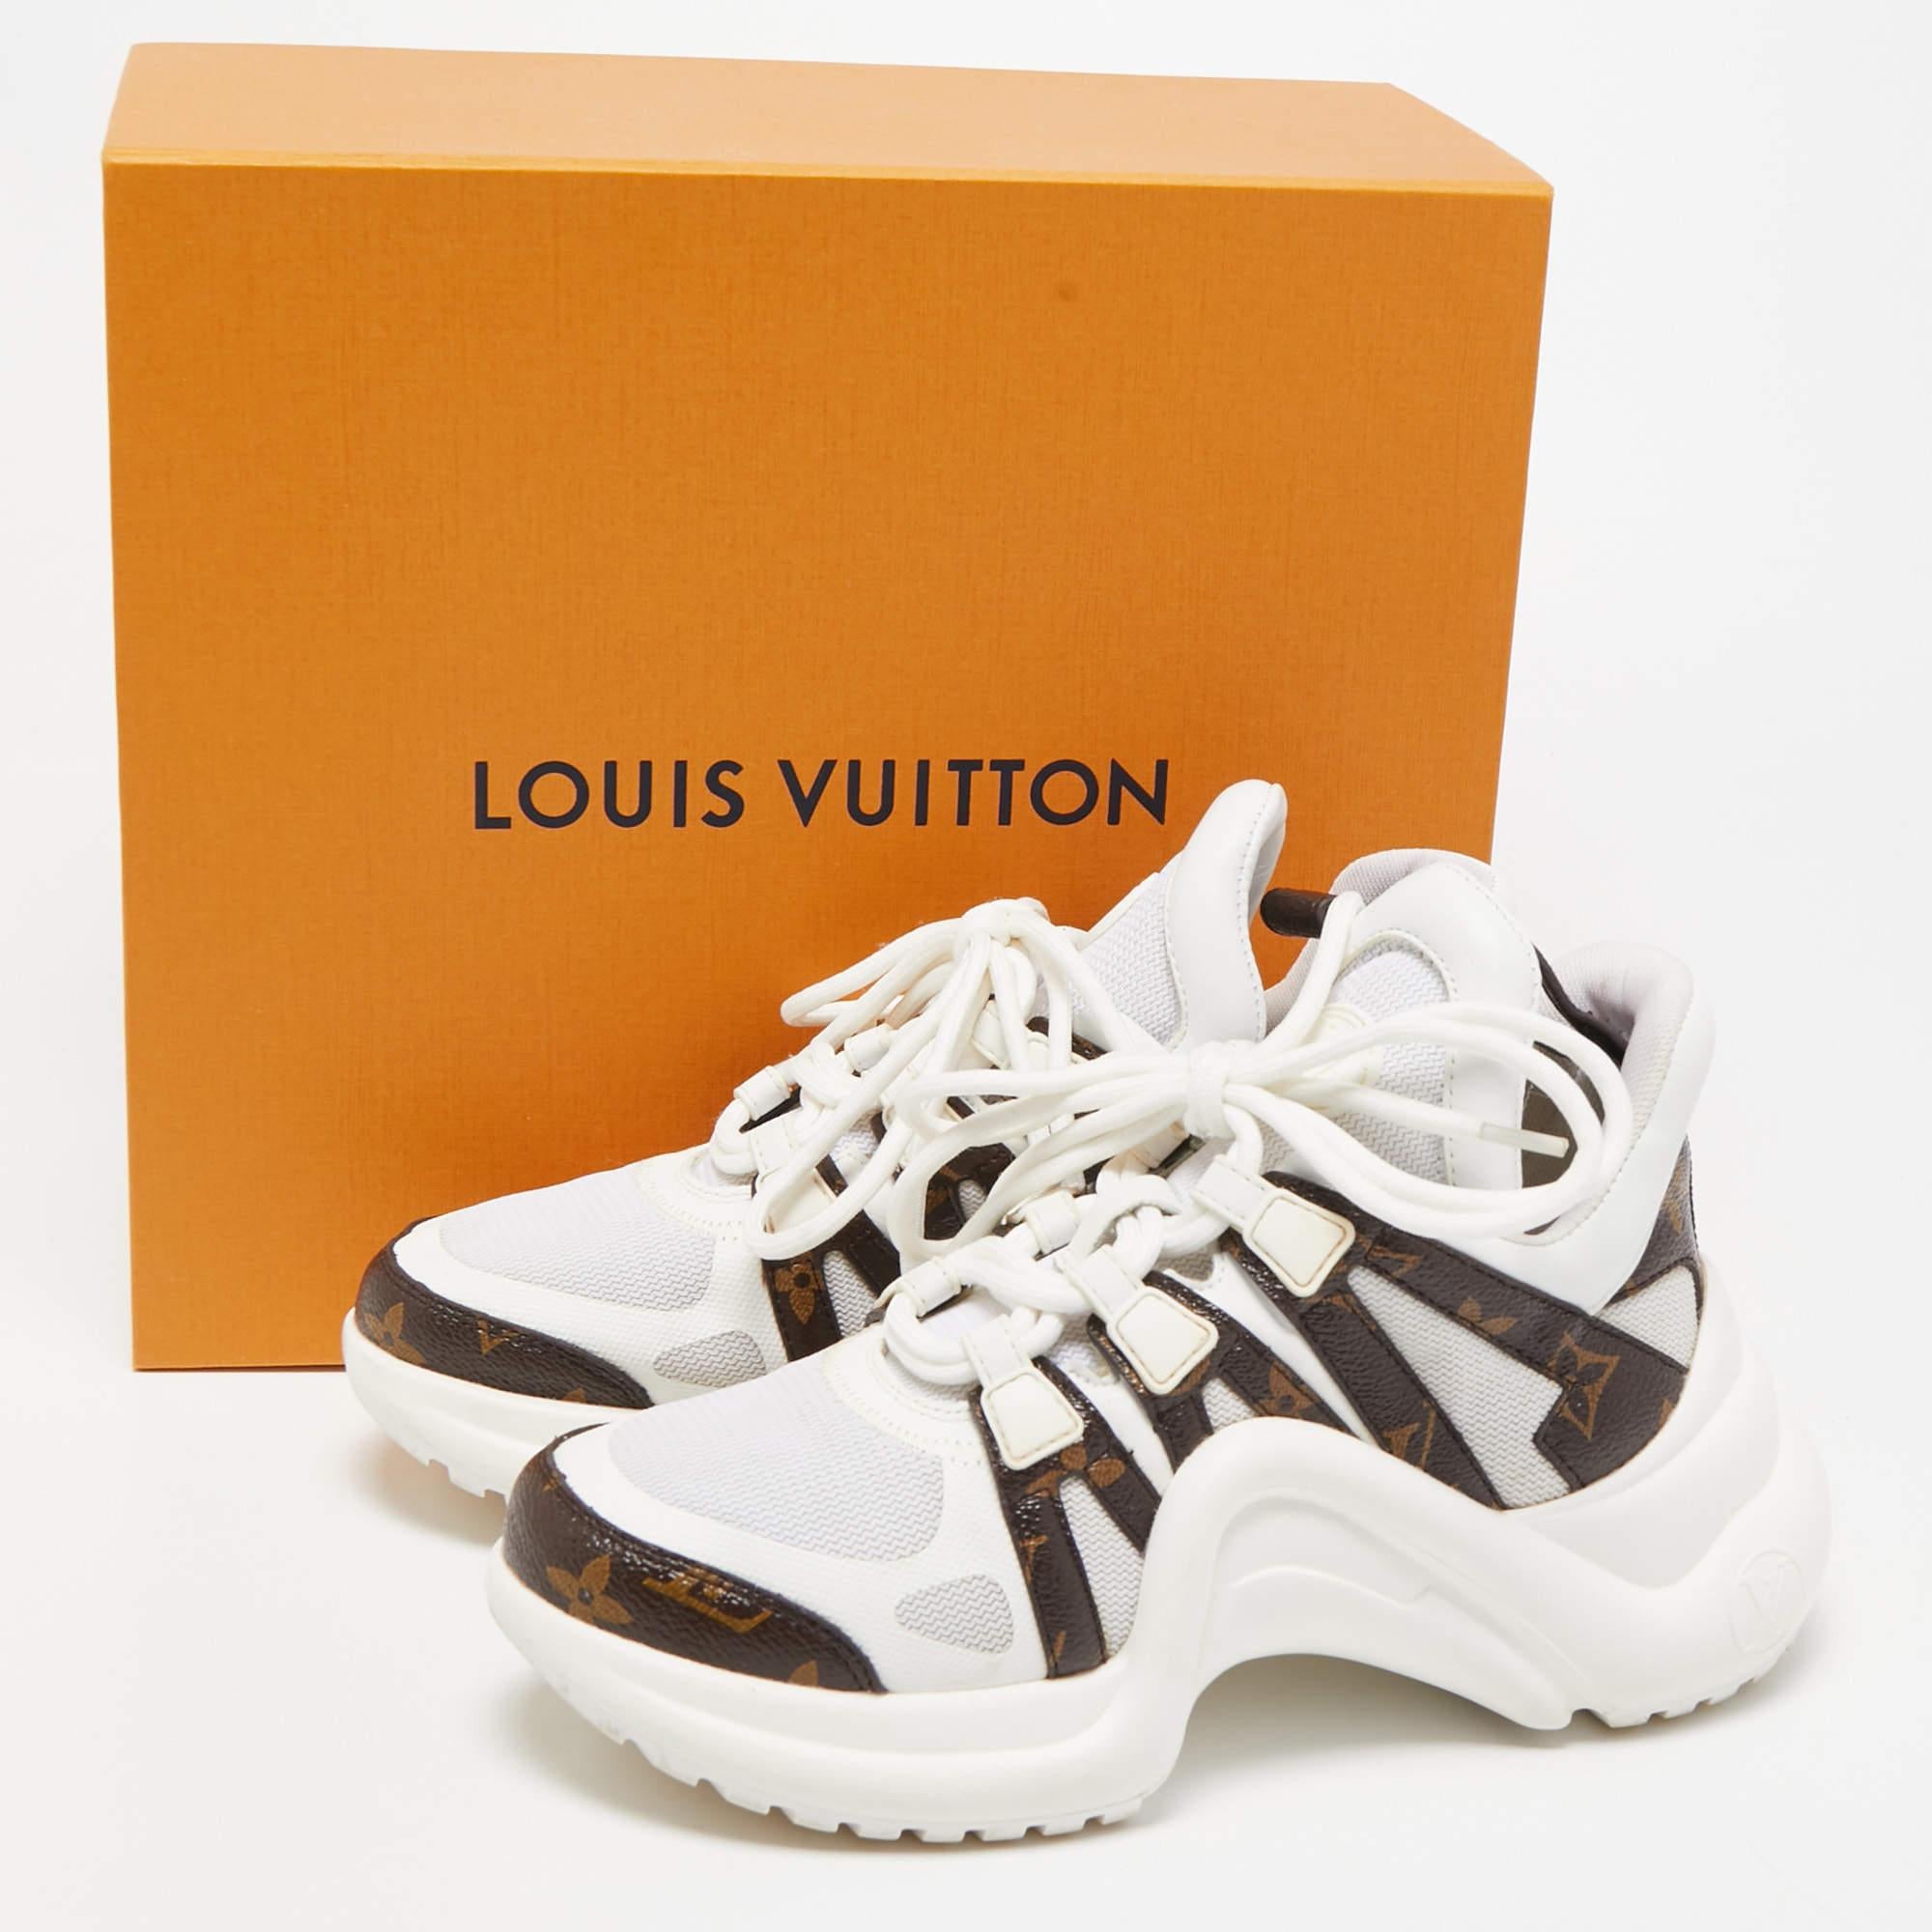 Louis Vuitton White Nylon and Leather Archlight Low Top Sneakers Size 36 5